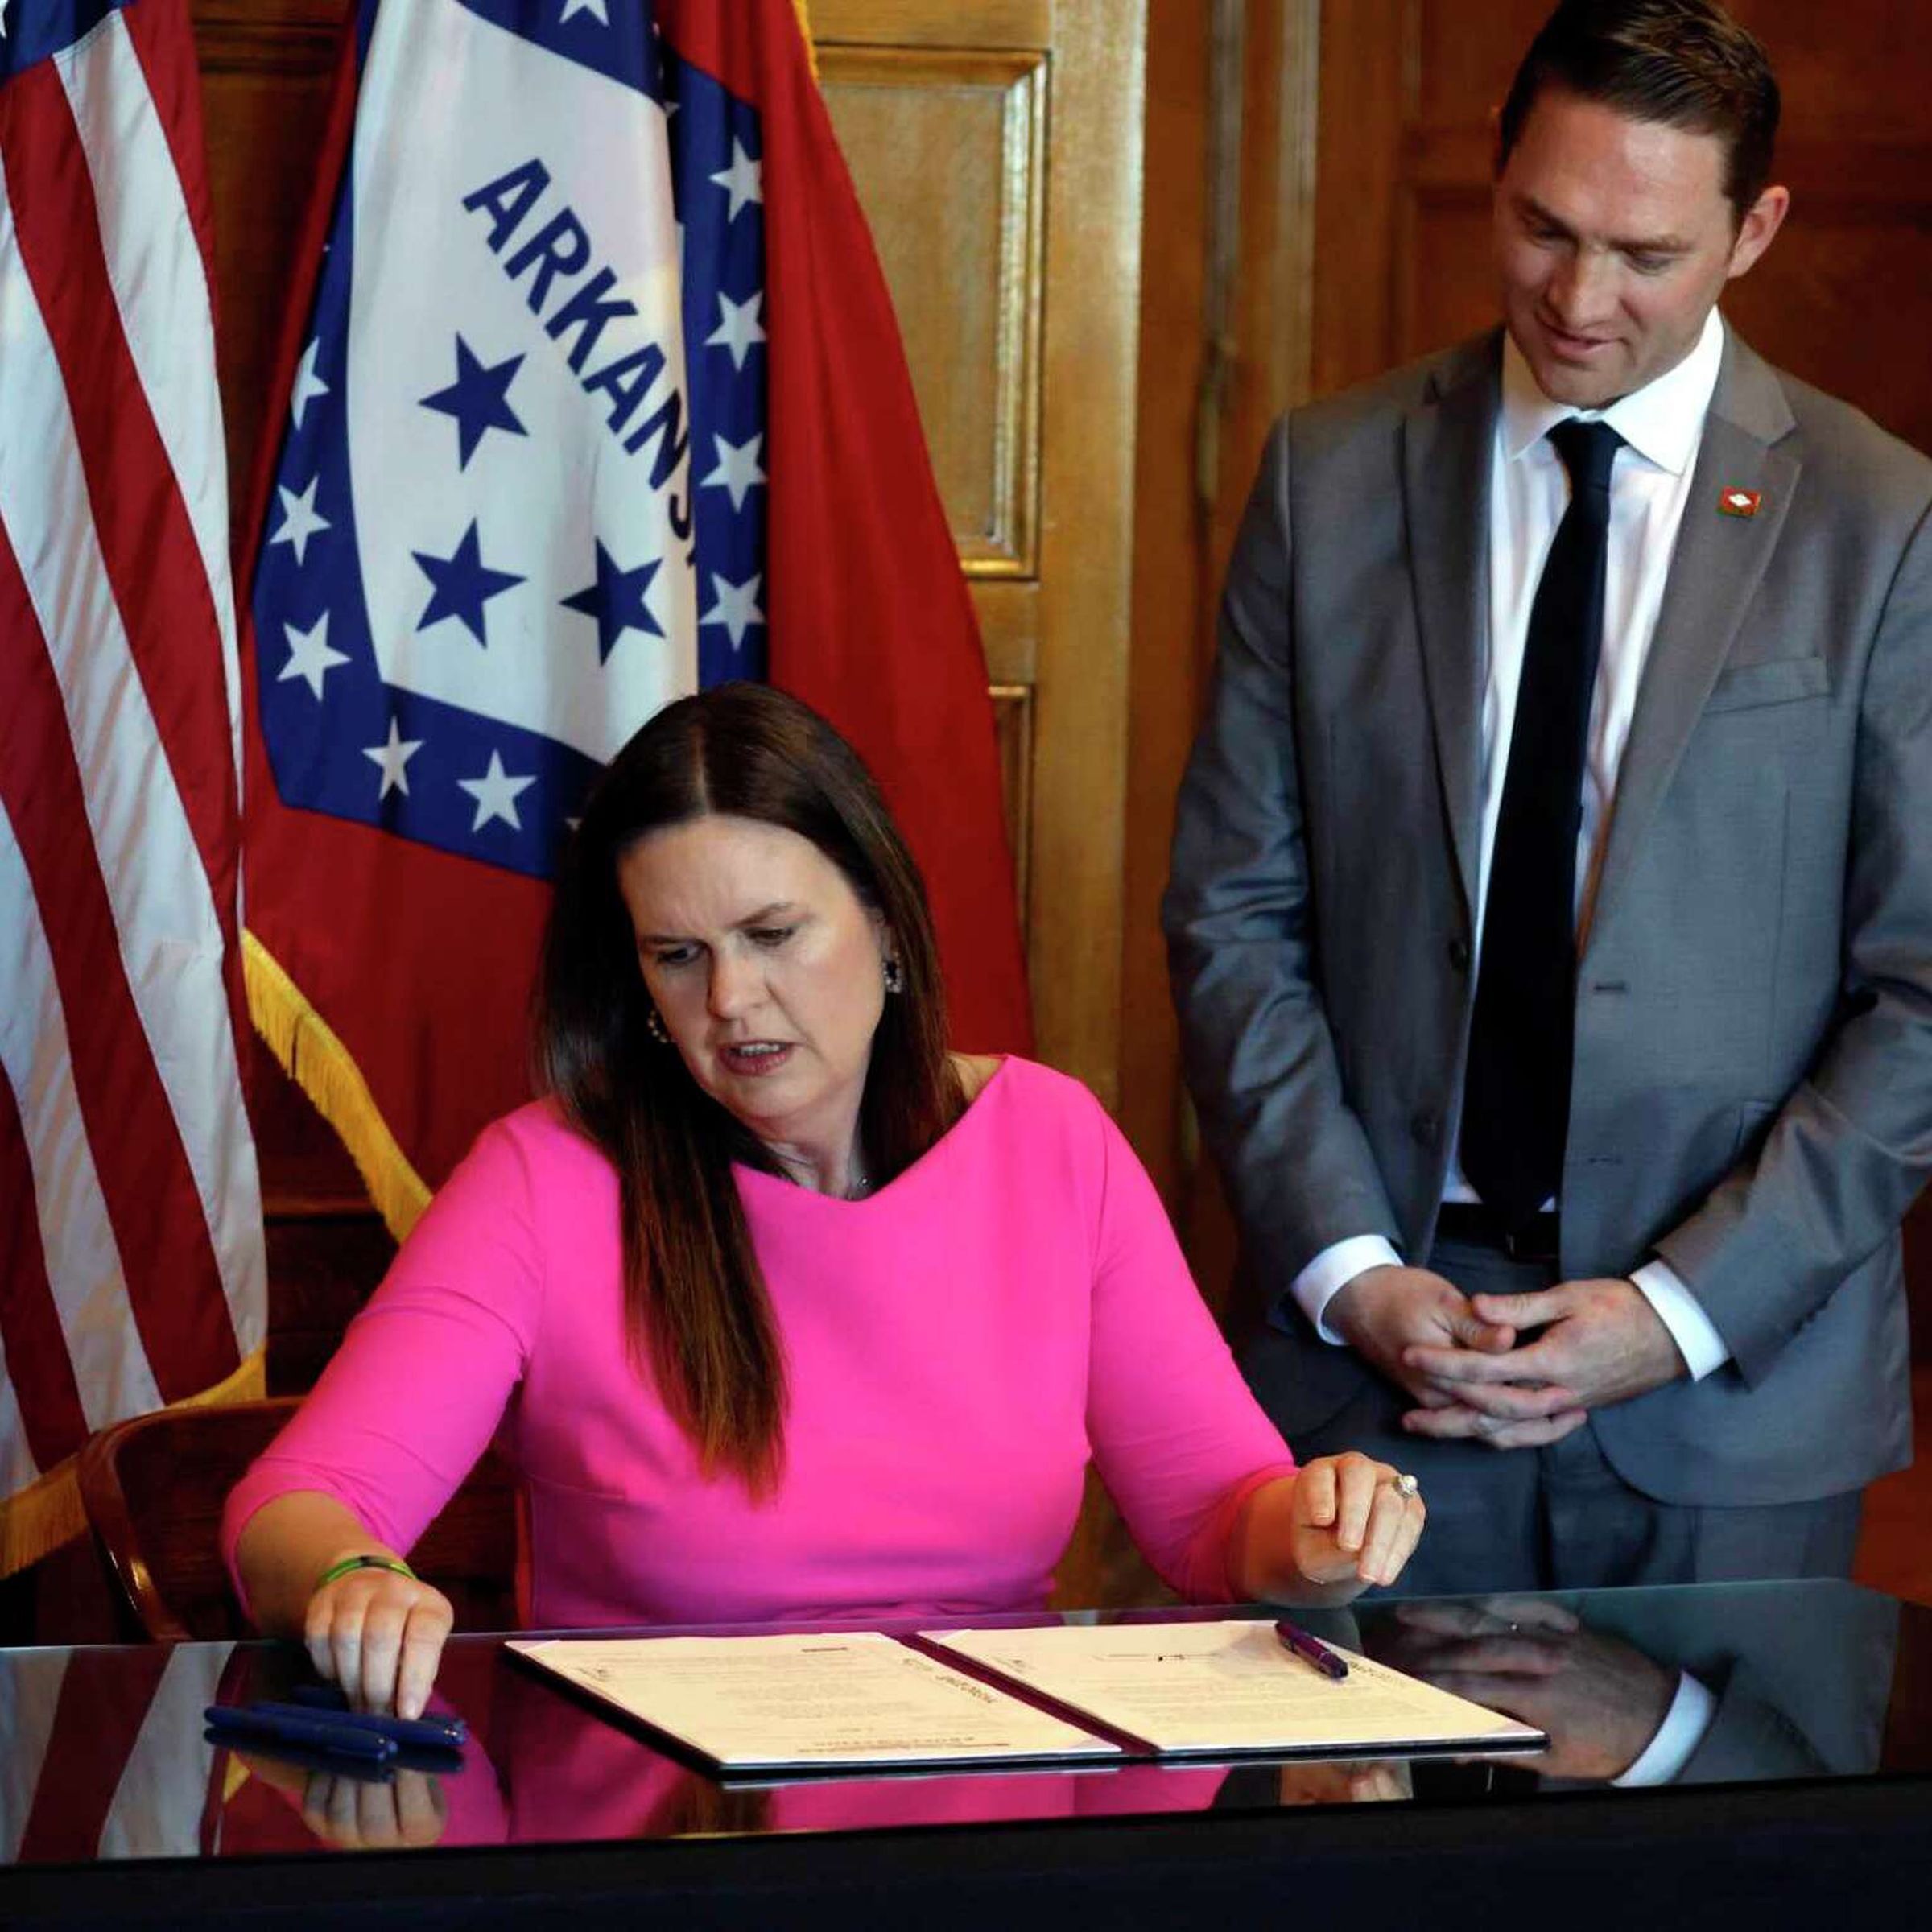 Arkansas Governor Sarah Huckabee Sanders signing in the Social Media Safety Act.